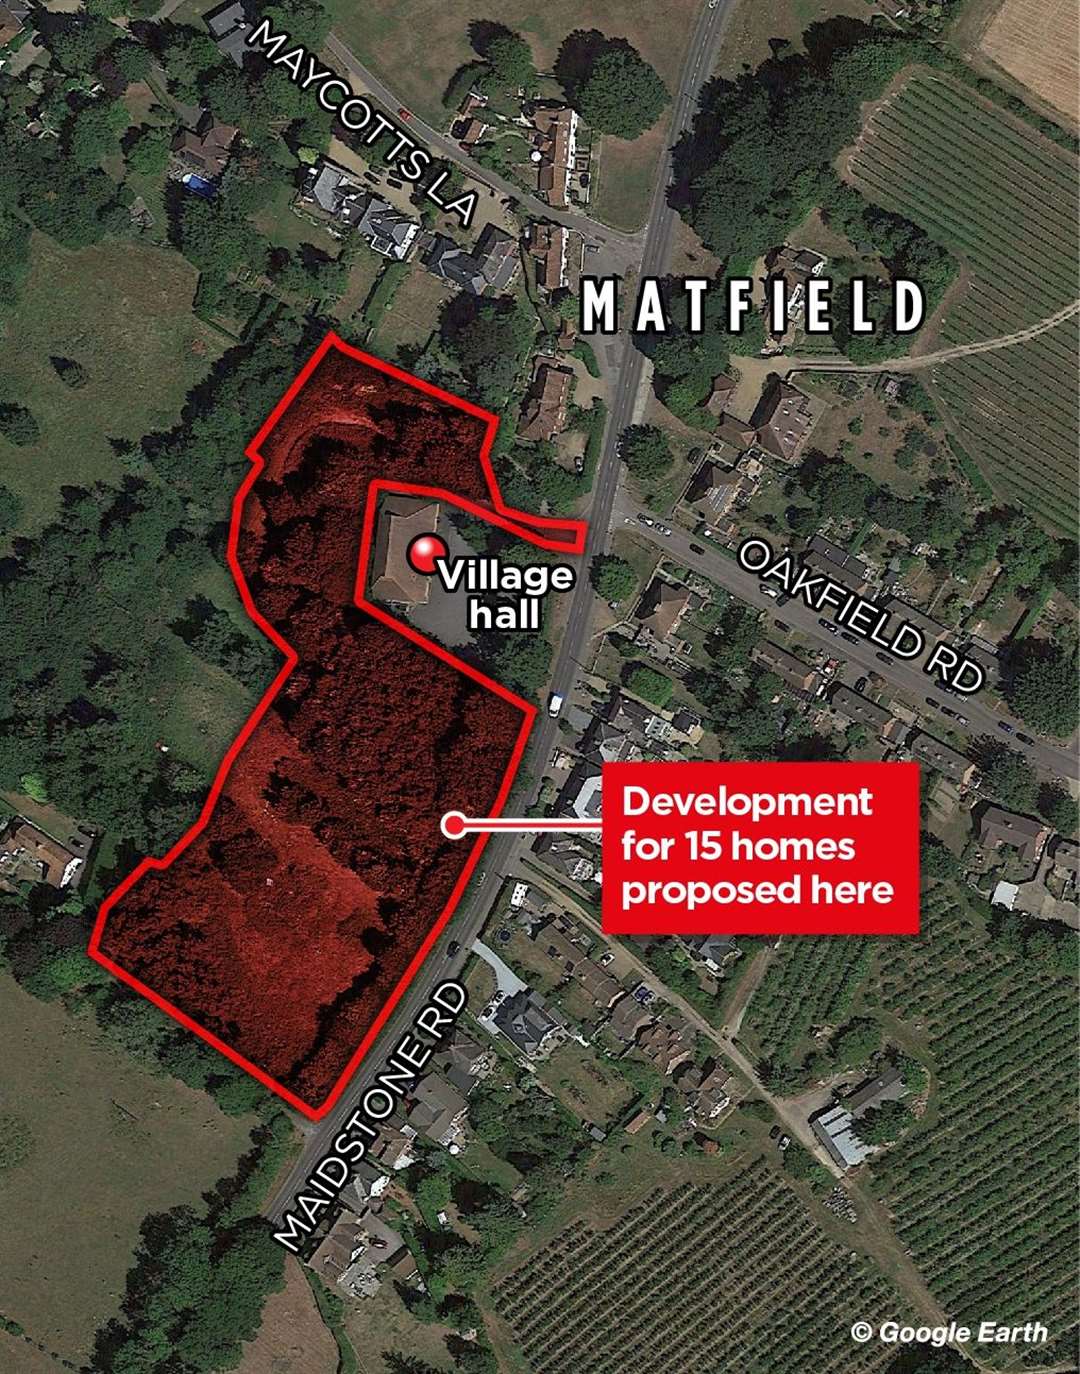 The red outline marks the boundary of the application site off Maidstone Road, Matfield